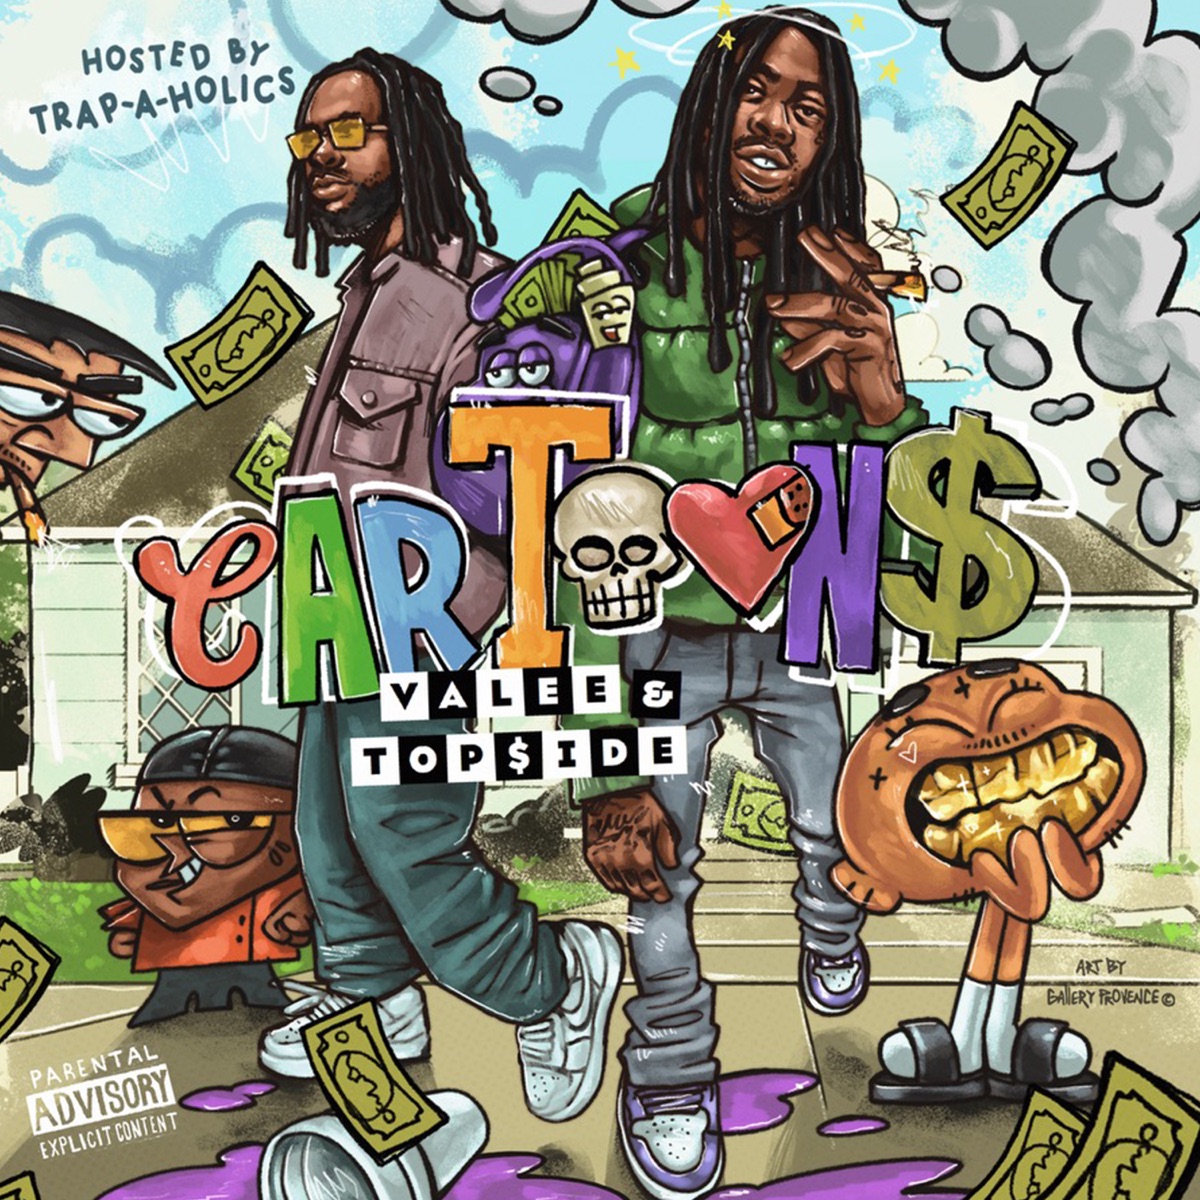 Valee, Top$ide & Trap-A-Holics – Toyota